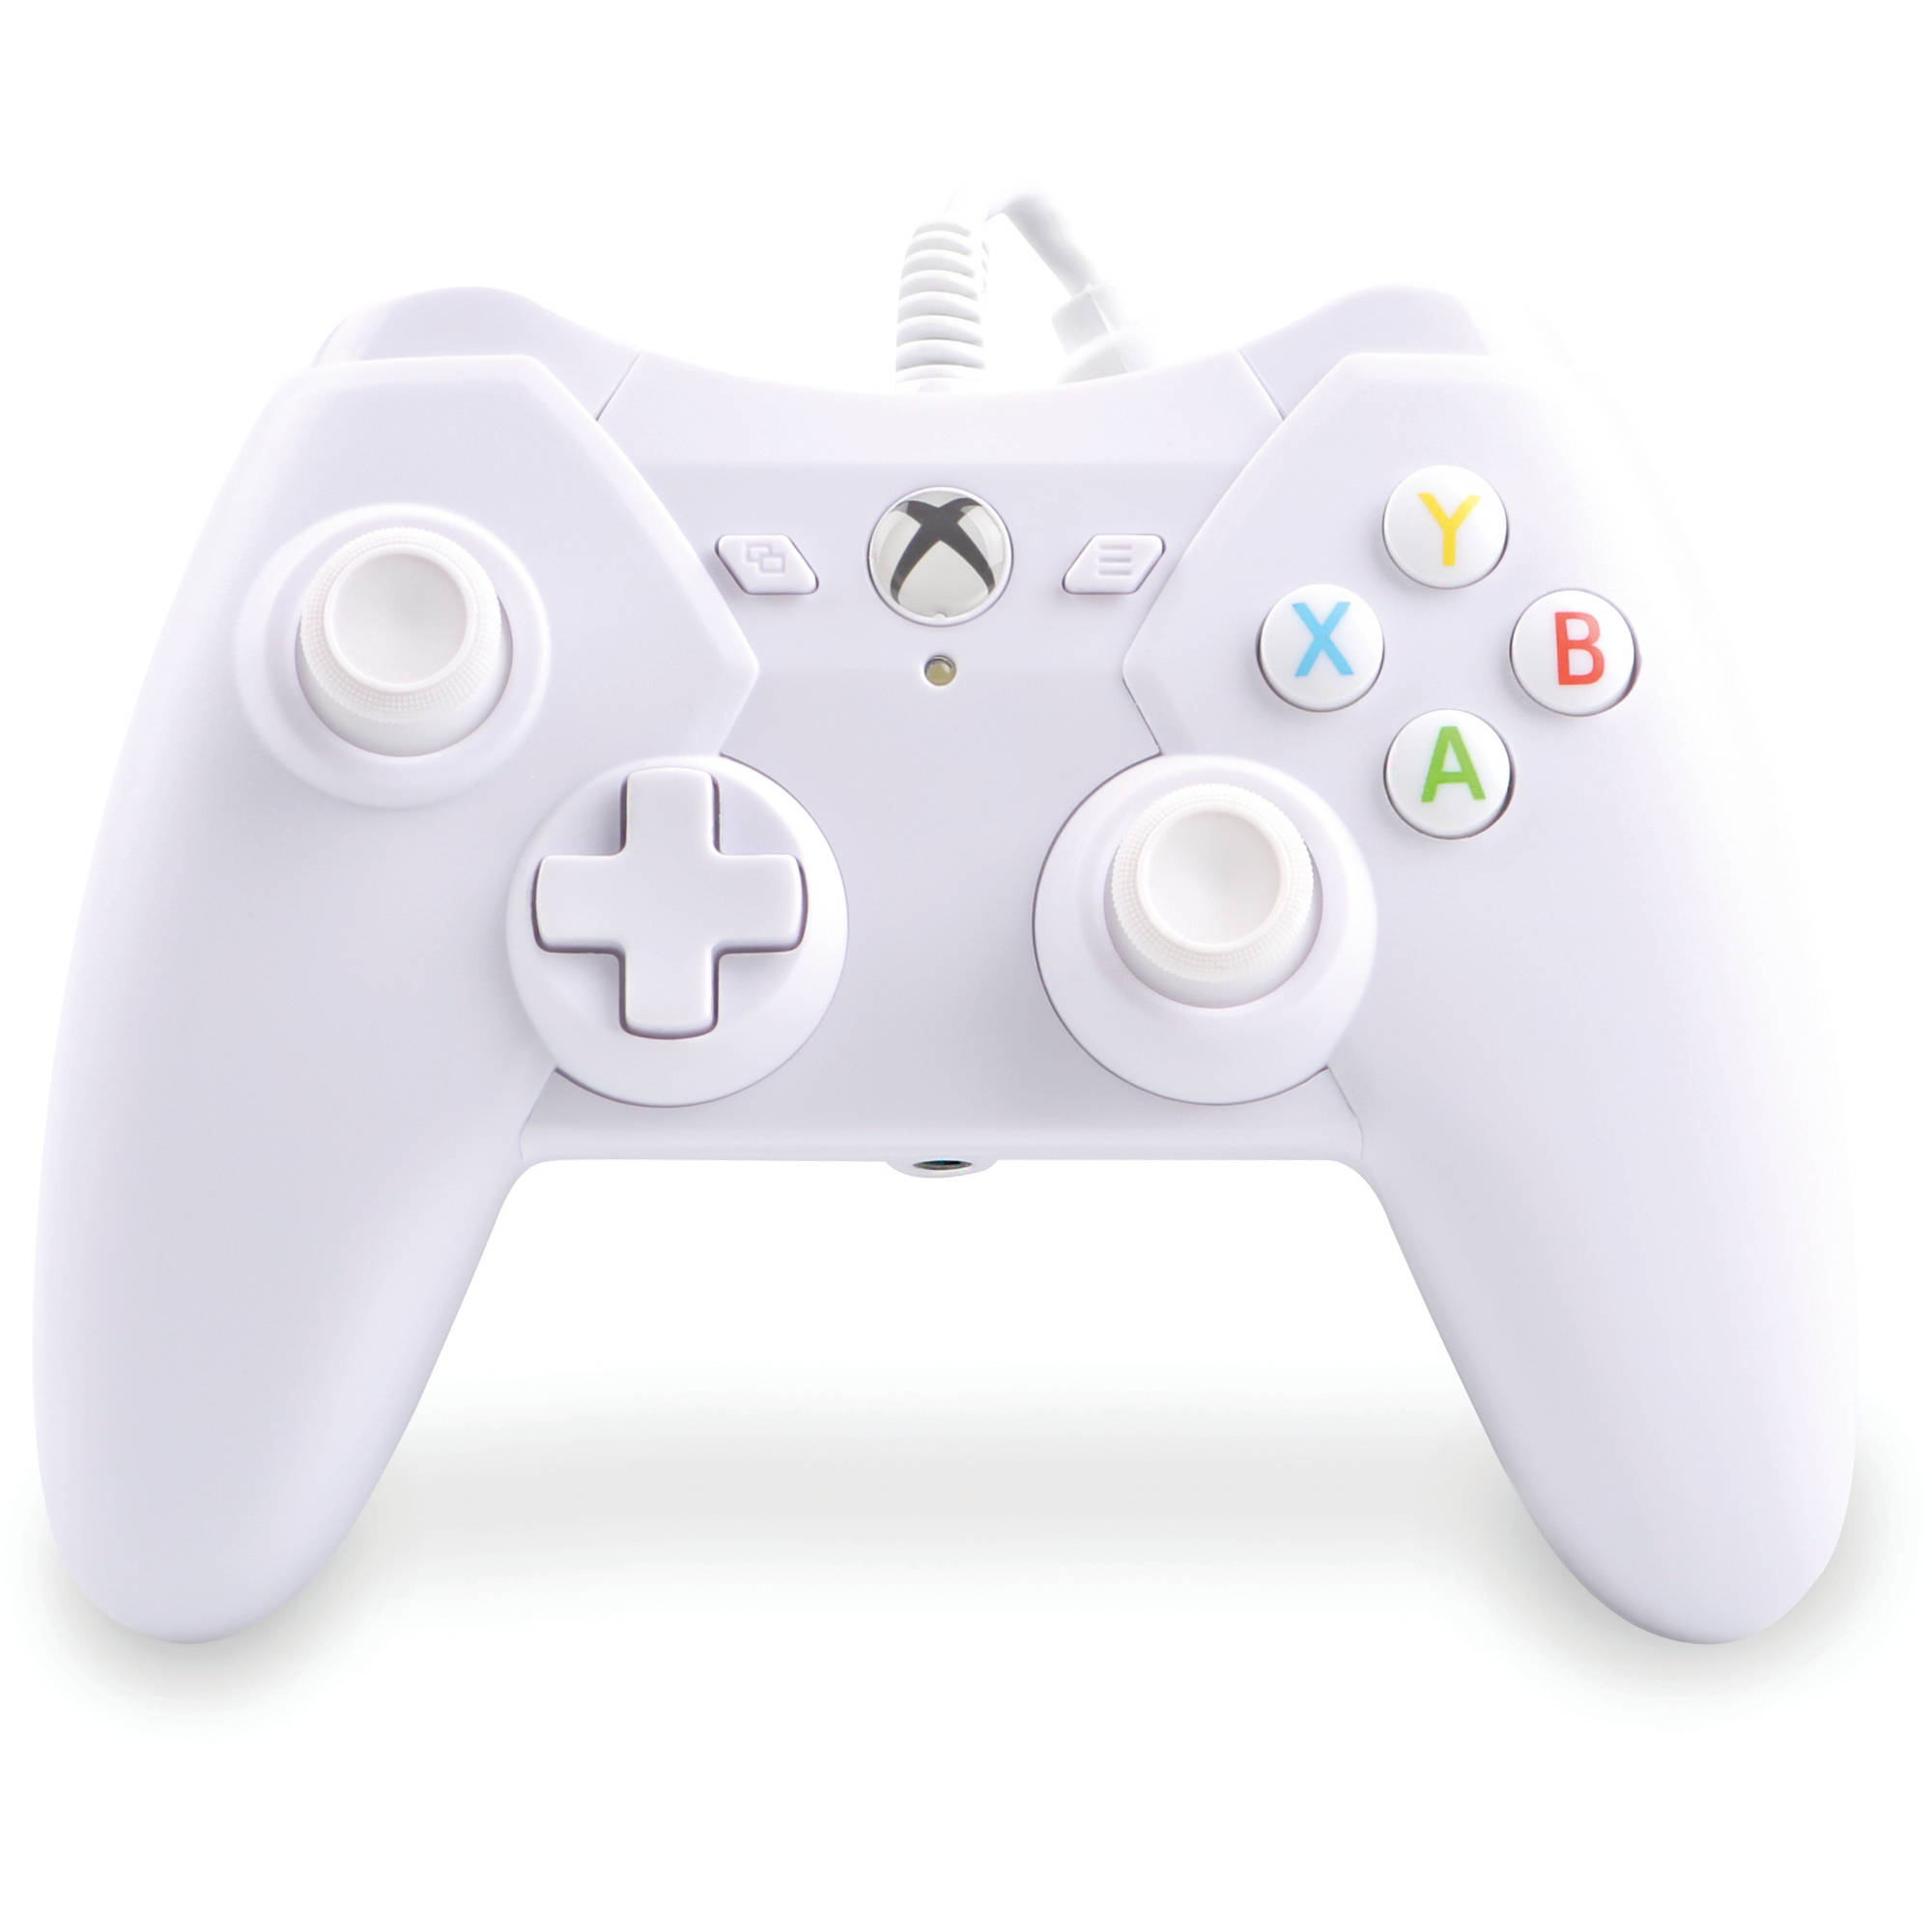 PowerA Xbox One Pro Ex Wired Controller, White, 1414134-01 - image 1 of 7